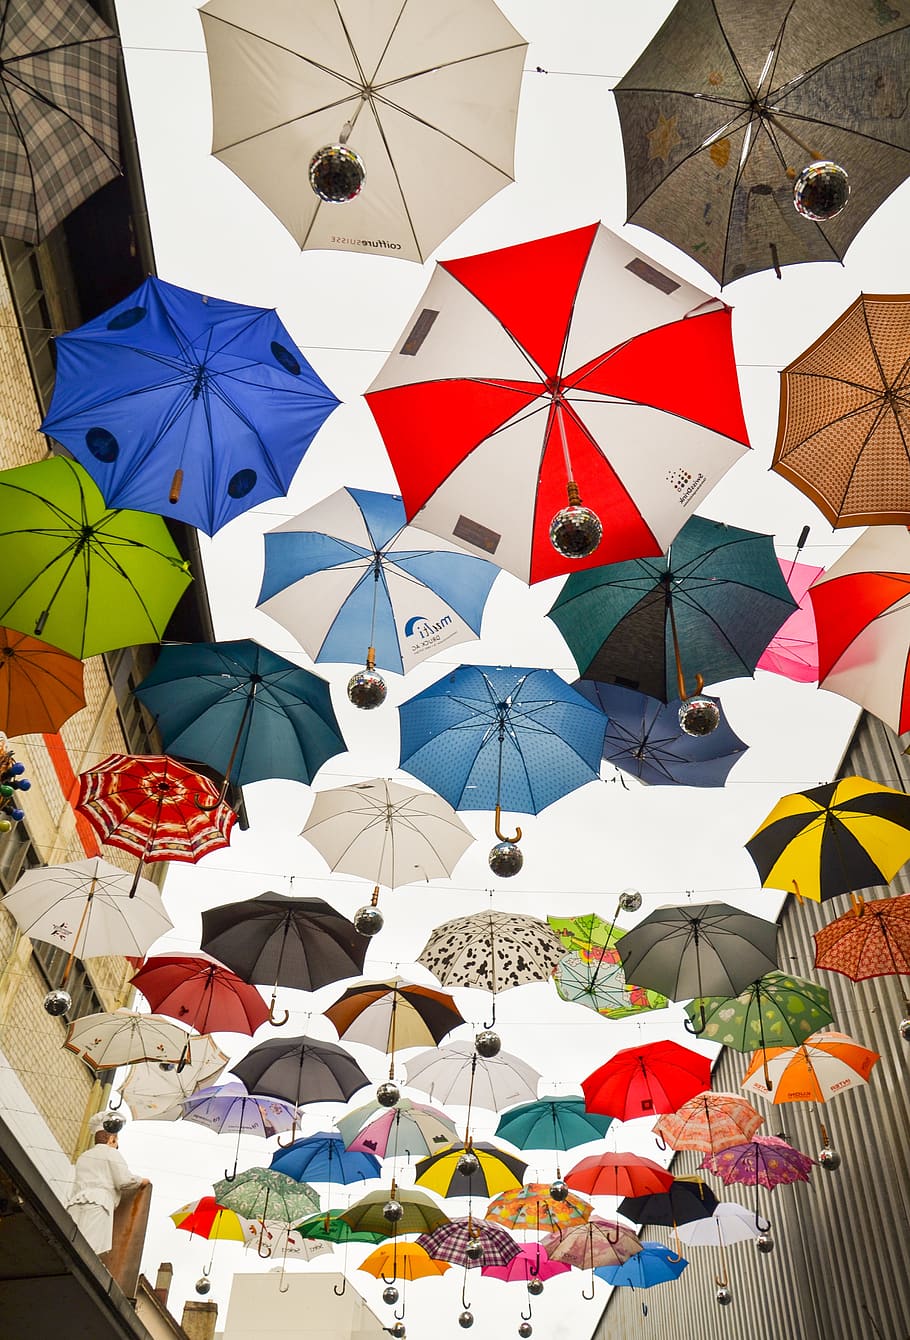 umbrella, protection, screens, rainy weather, awning, april weather, shelter, colorful, funny, art